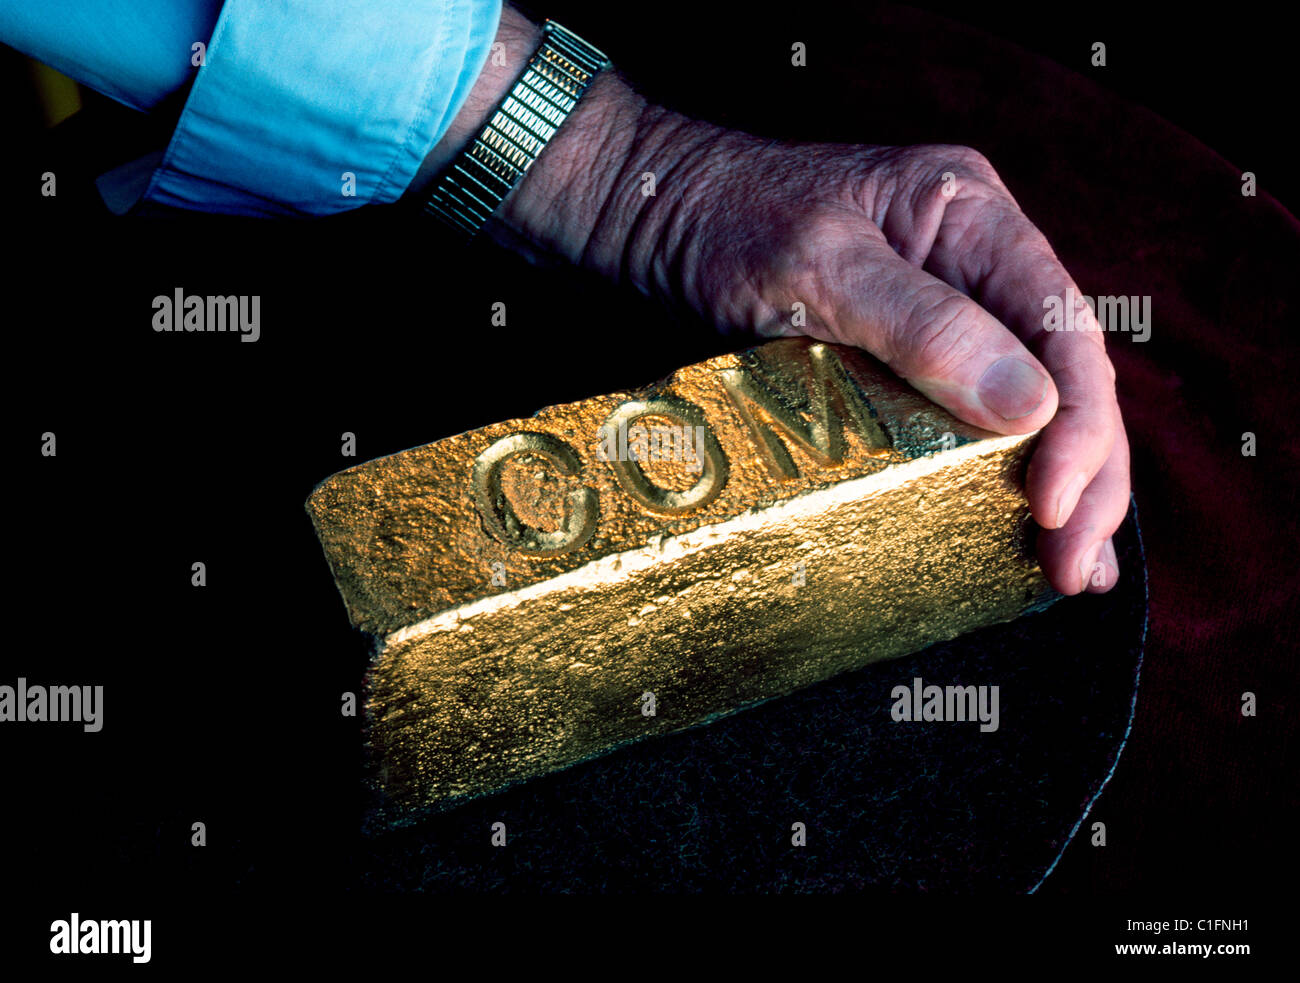 A man's hand grasps an ingot of gold molded and stamped by the Chamber of Mines (COM) at a Johannesburg gold mine in South Africa. Stock Photo